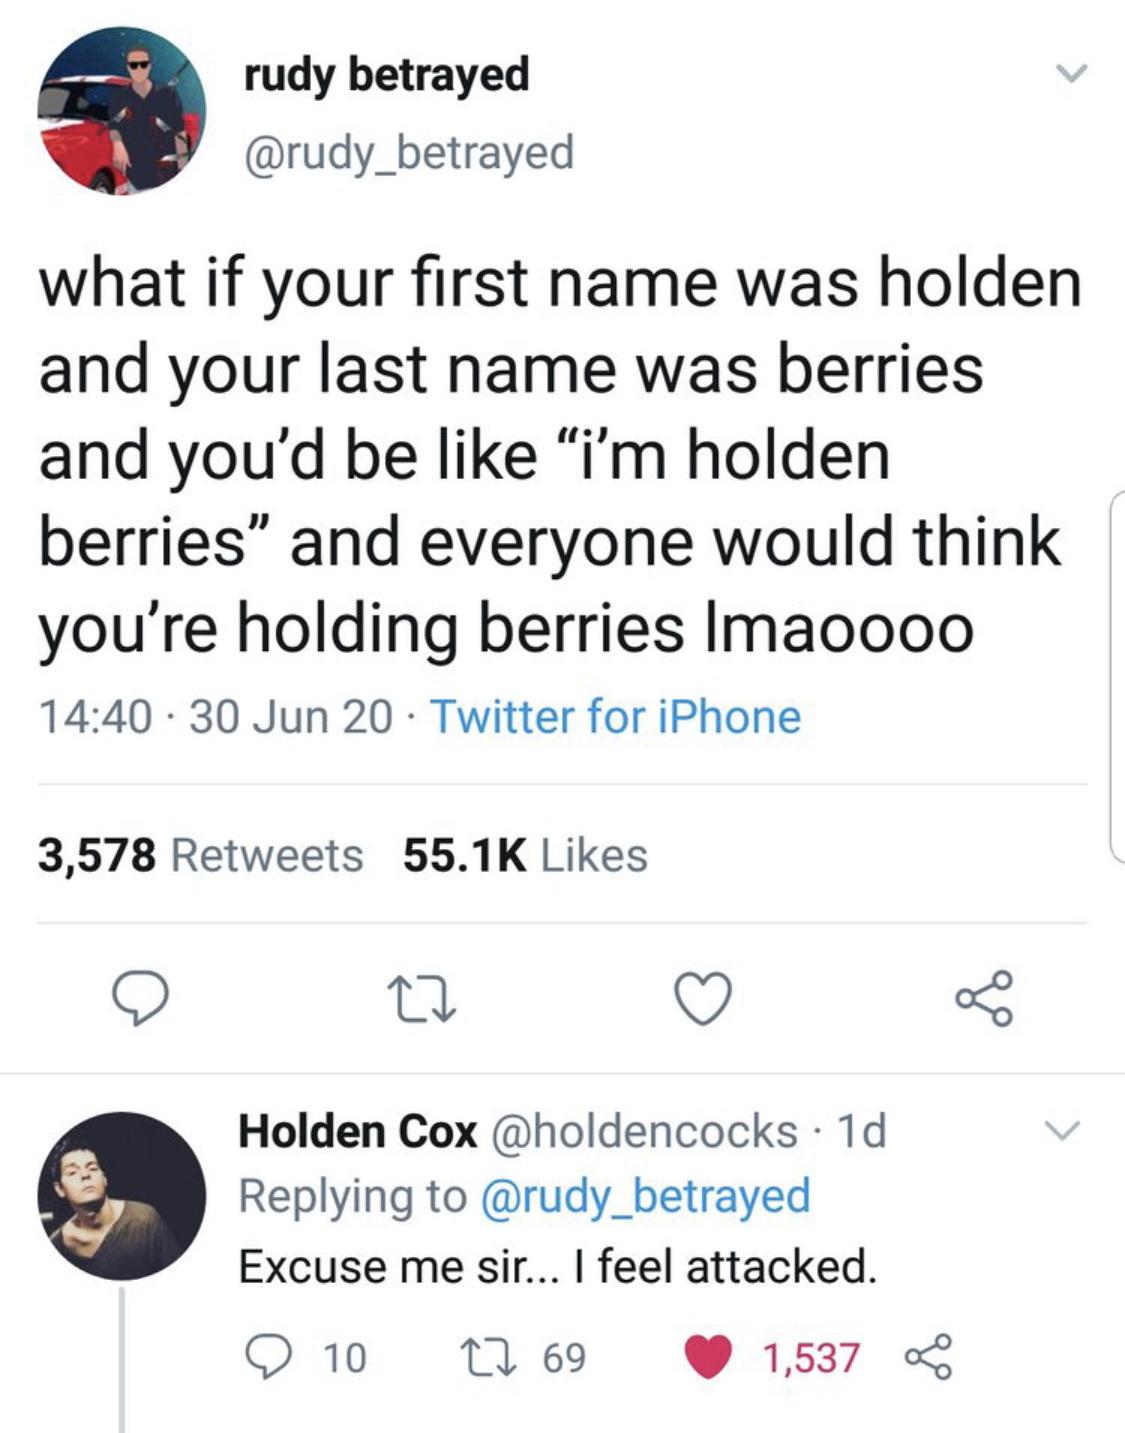 point - rudy betrayed what if your first name was holden and your last name was berries and you'd be "i'm holden berries and everyone would think you're holding berries Imaoooo 30 Jun 20 Twitter for iPhone 3,578 27 8 Holden Cox 1d Excuse me sir... I feel 